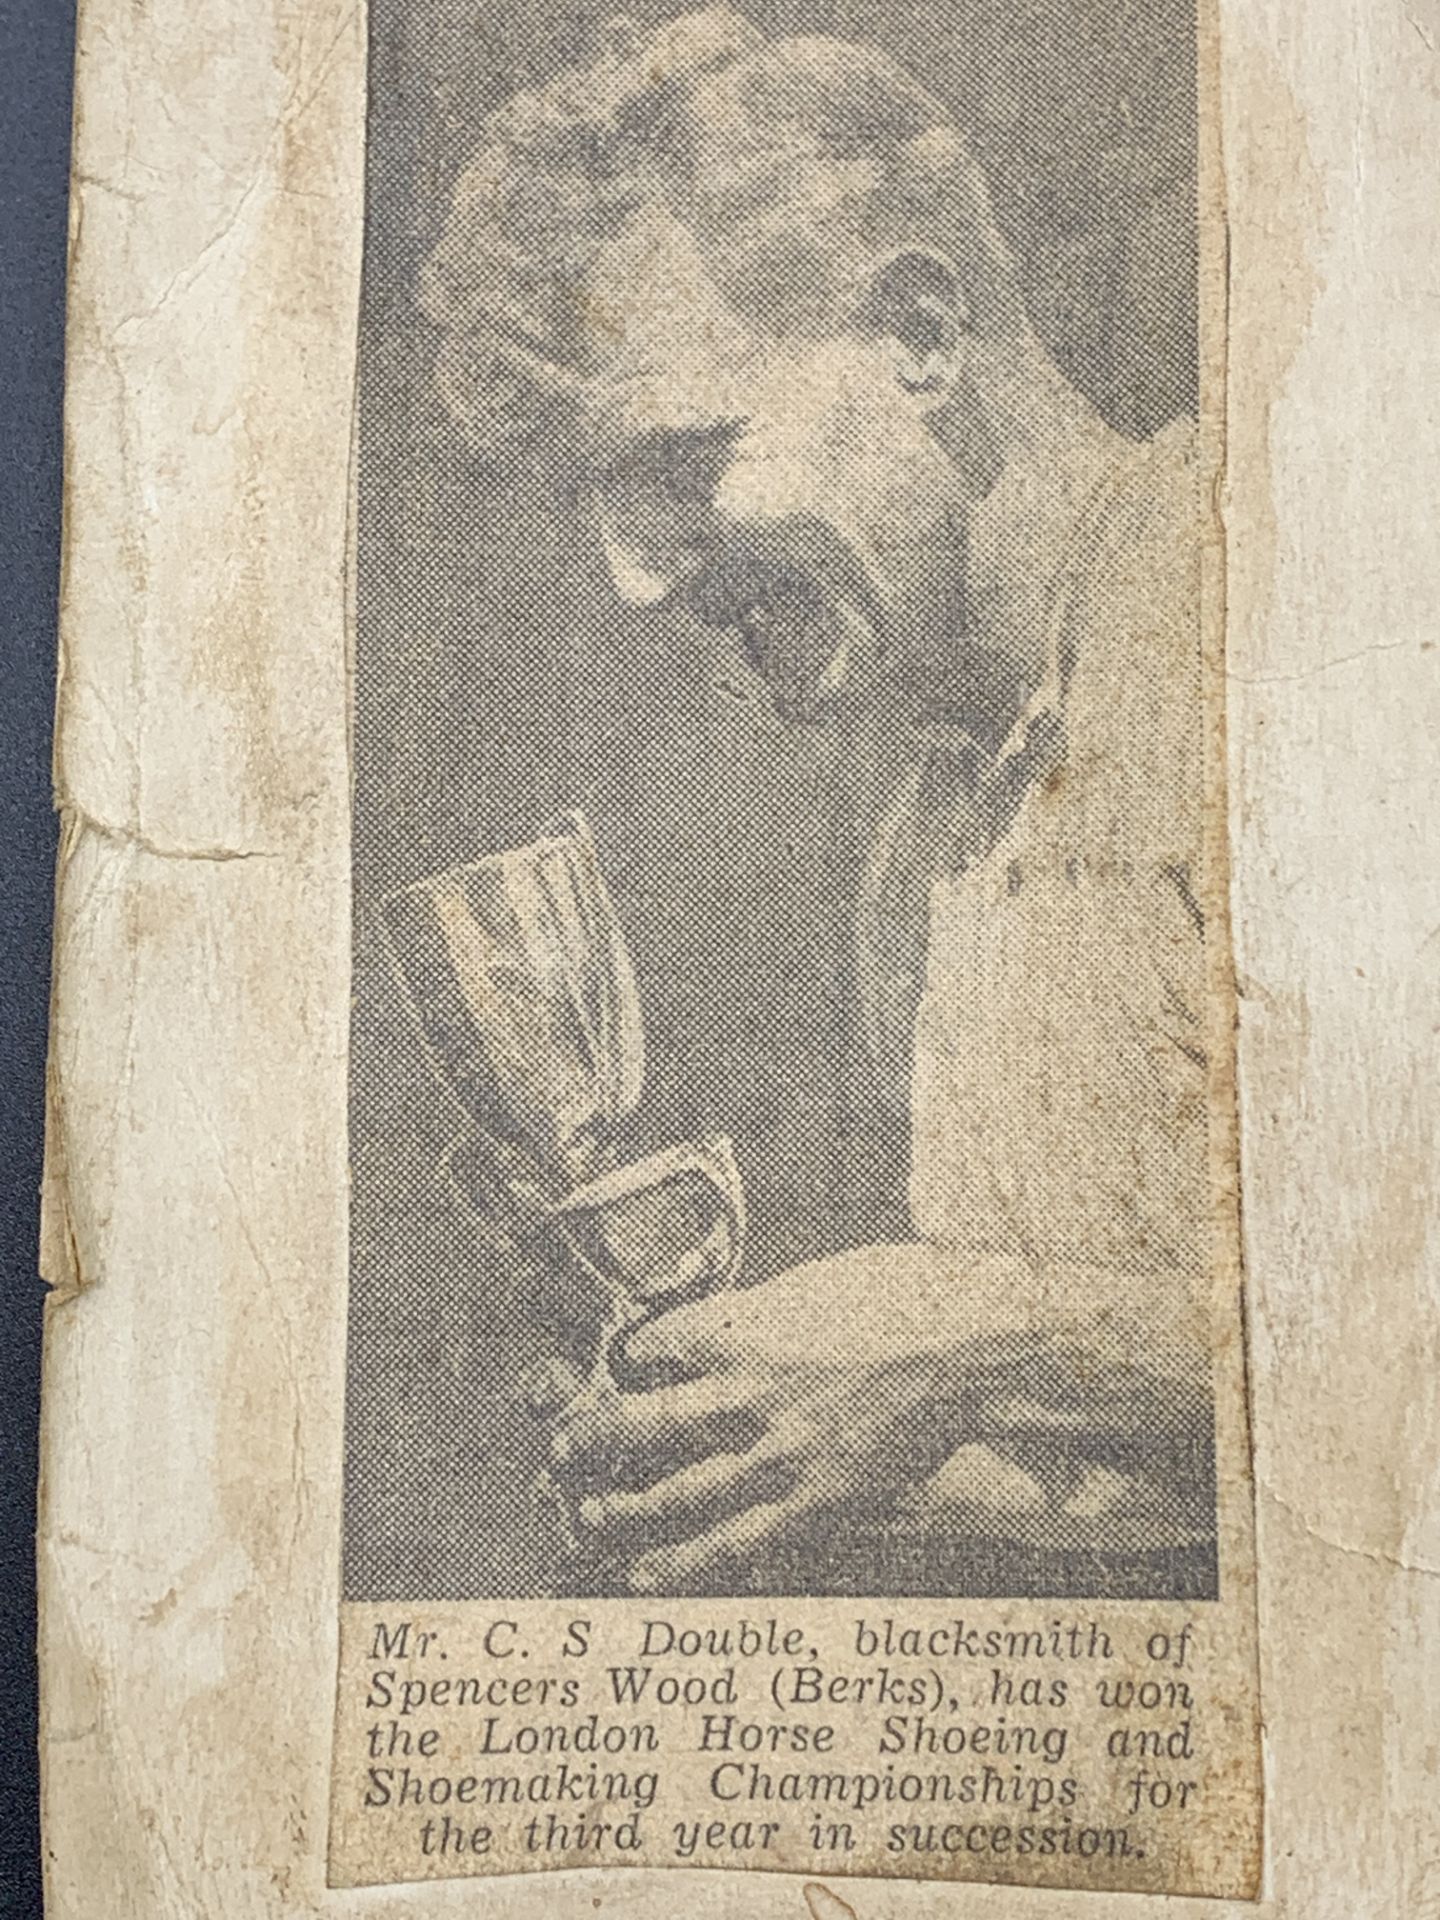 Silver trophy inscribed "Horse Shoeing & Horse Shoe Making Championship of London & District" - Image 3 of 4